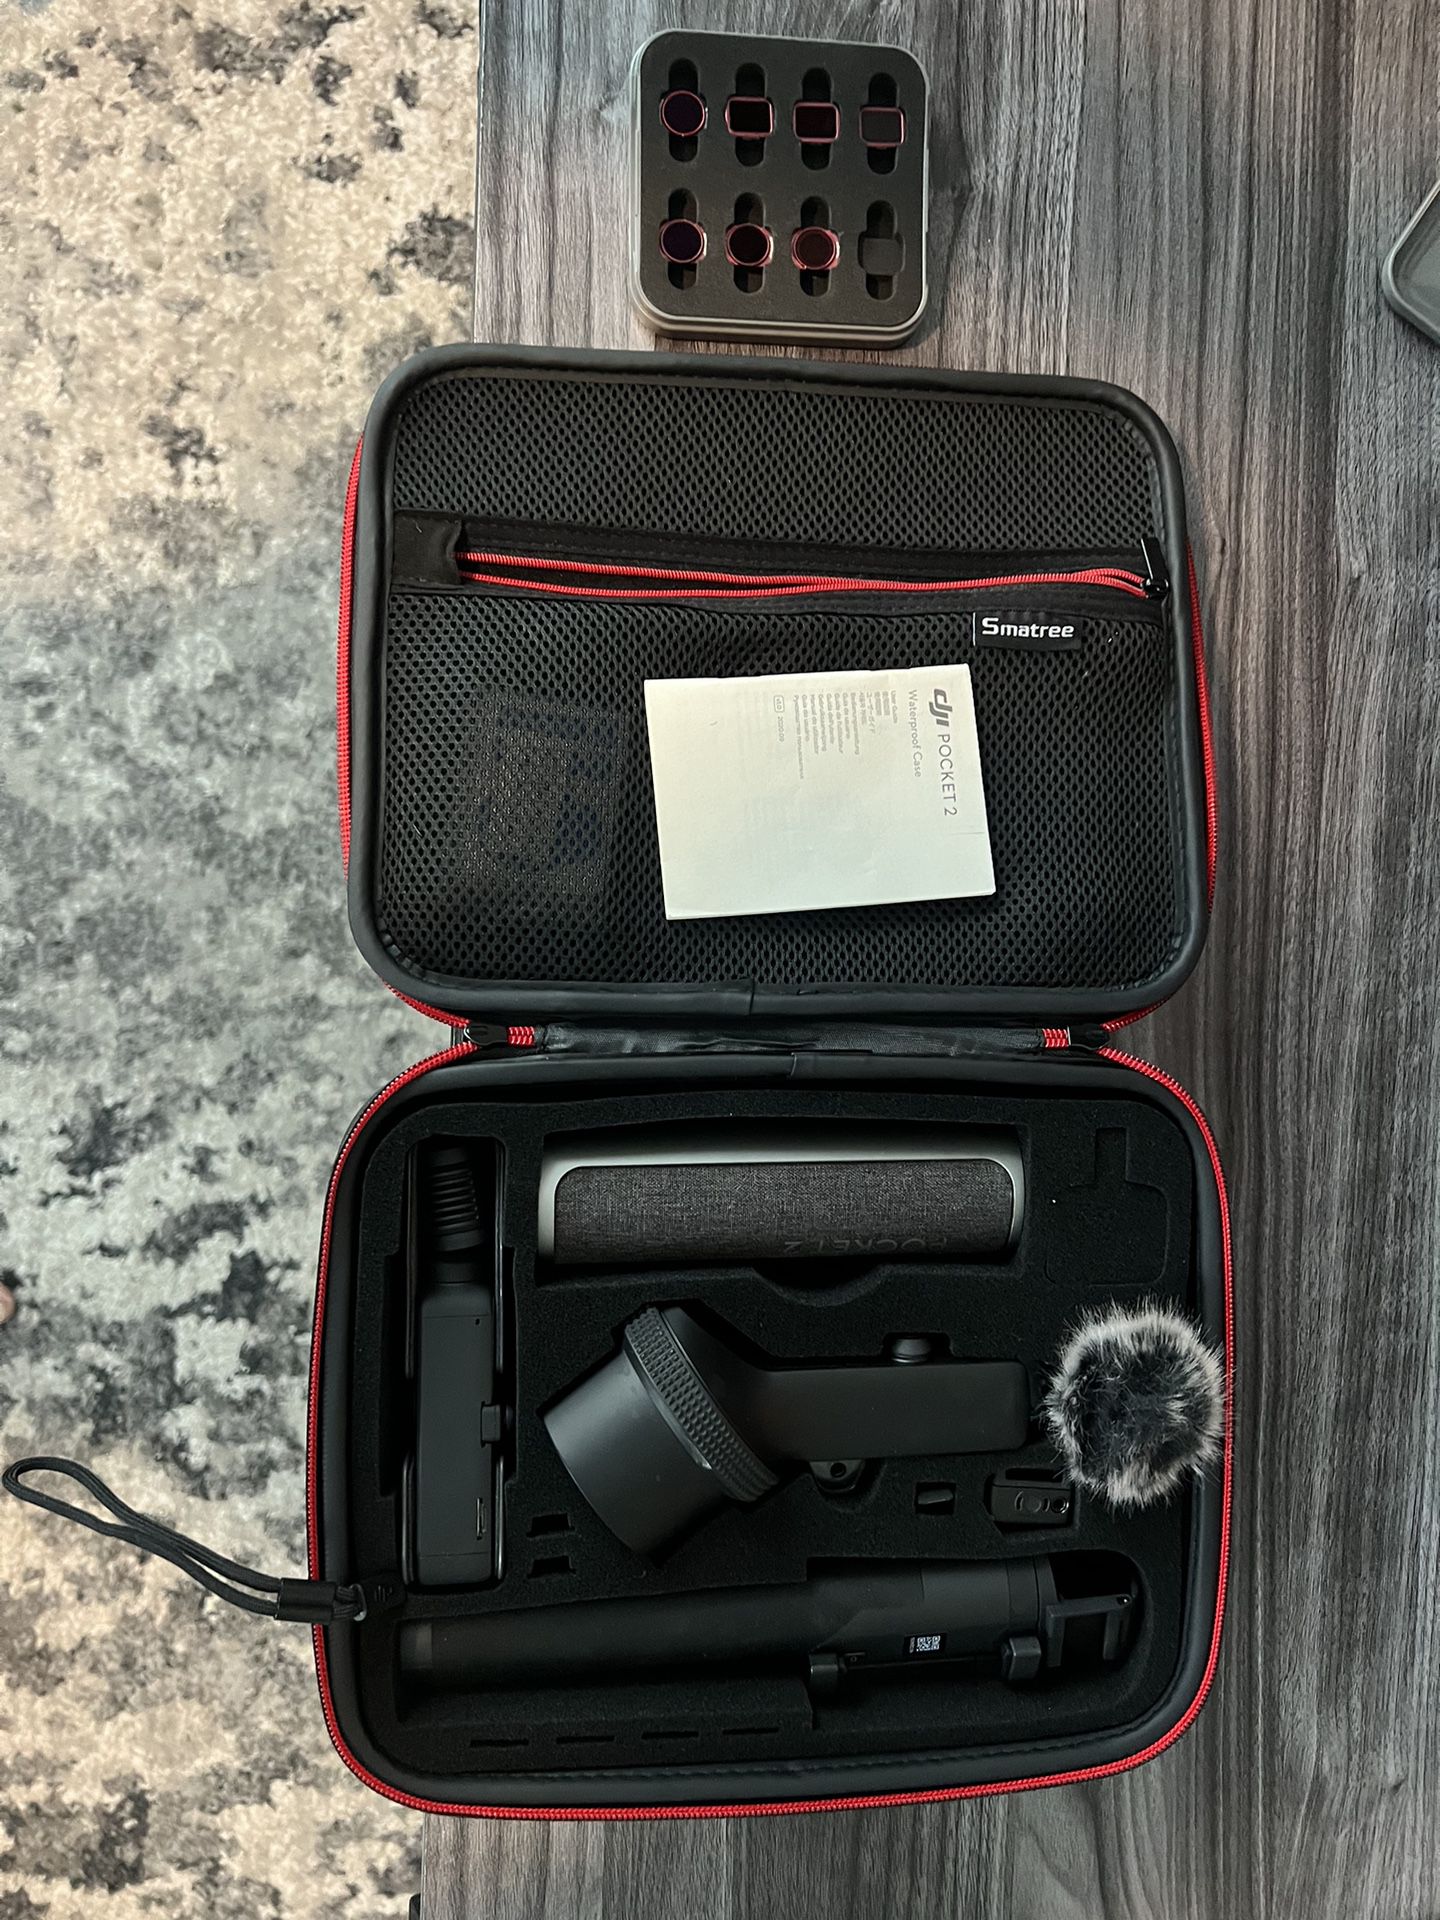 DJI Pocket 2 With Case And Accessories 